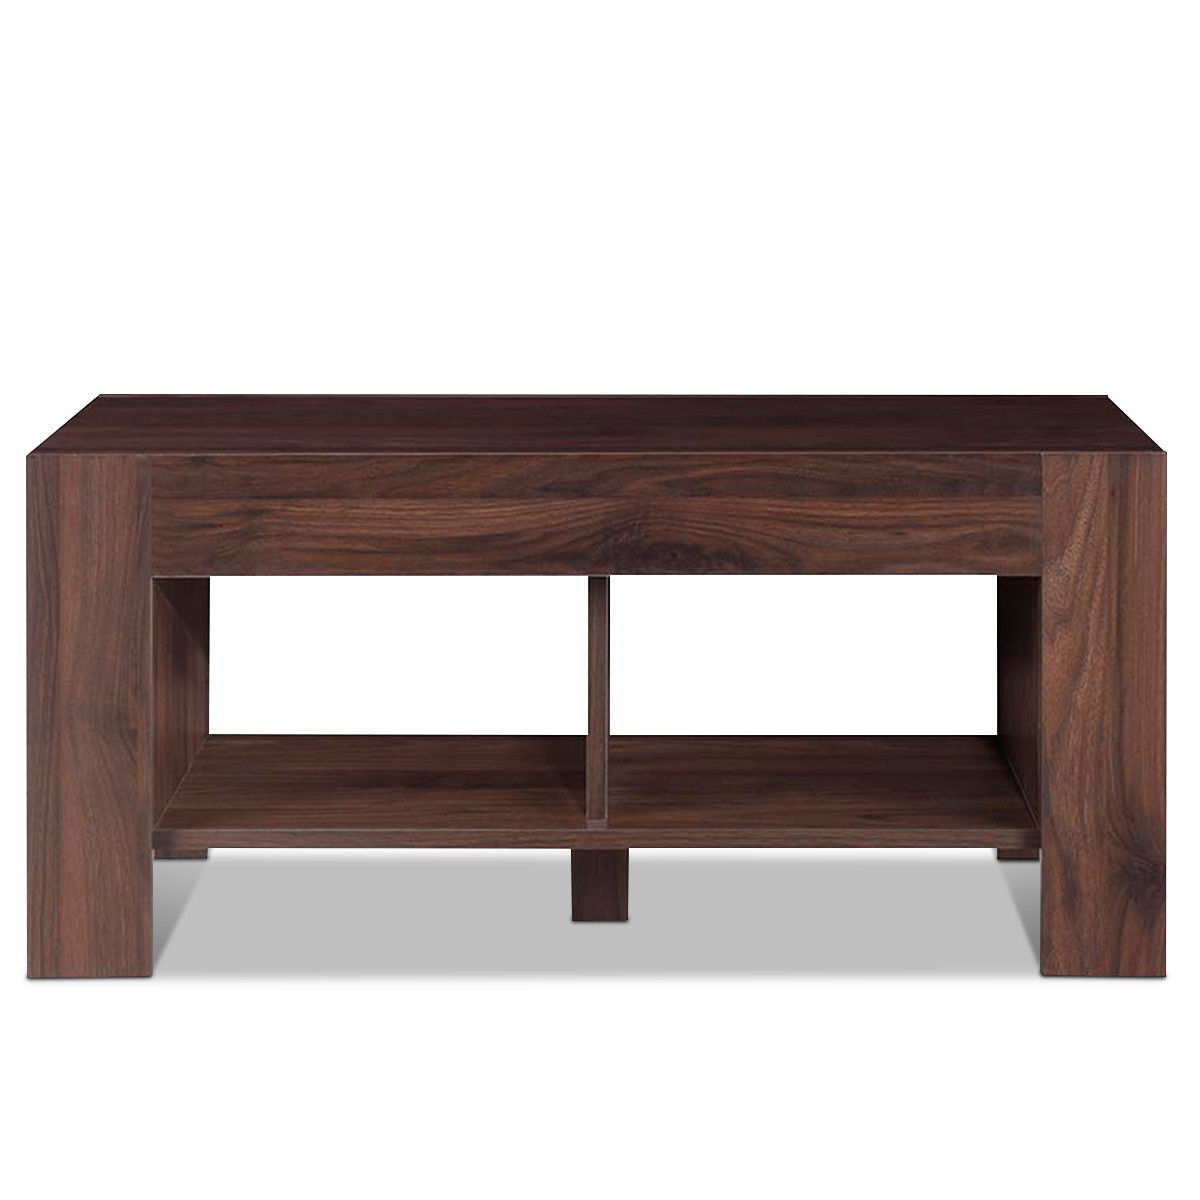 Gymax Minimalist Style Tea Table With Open Storage Spaces Walnut Wood Grain Table